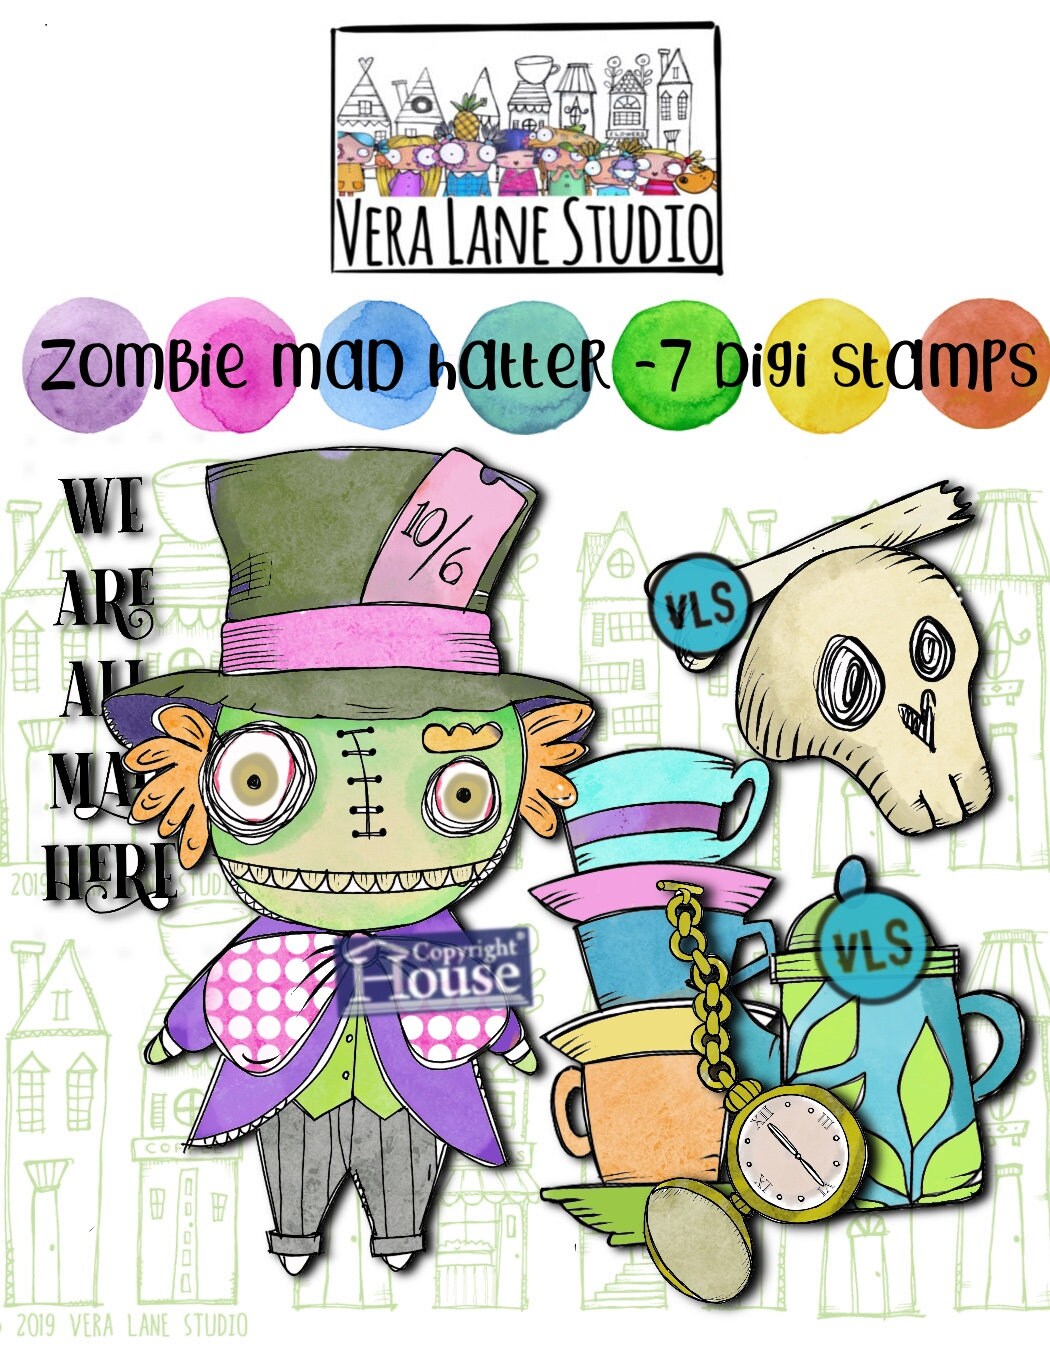 Zombie Mad Hatter   - 7 digi stamps in jpg and png files